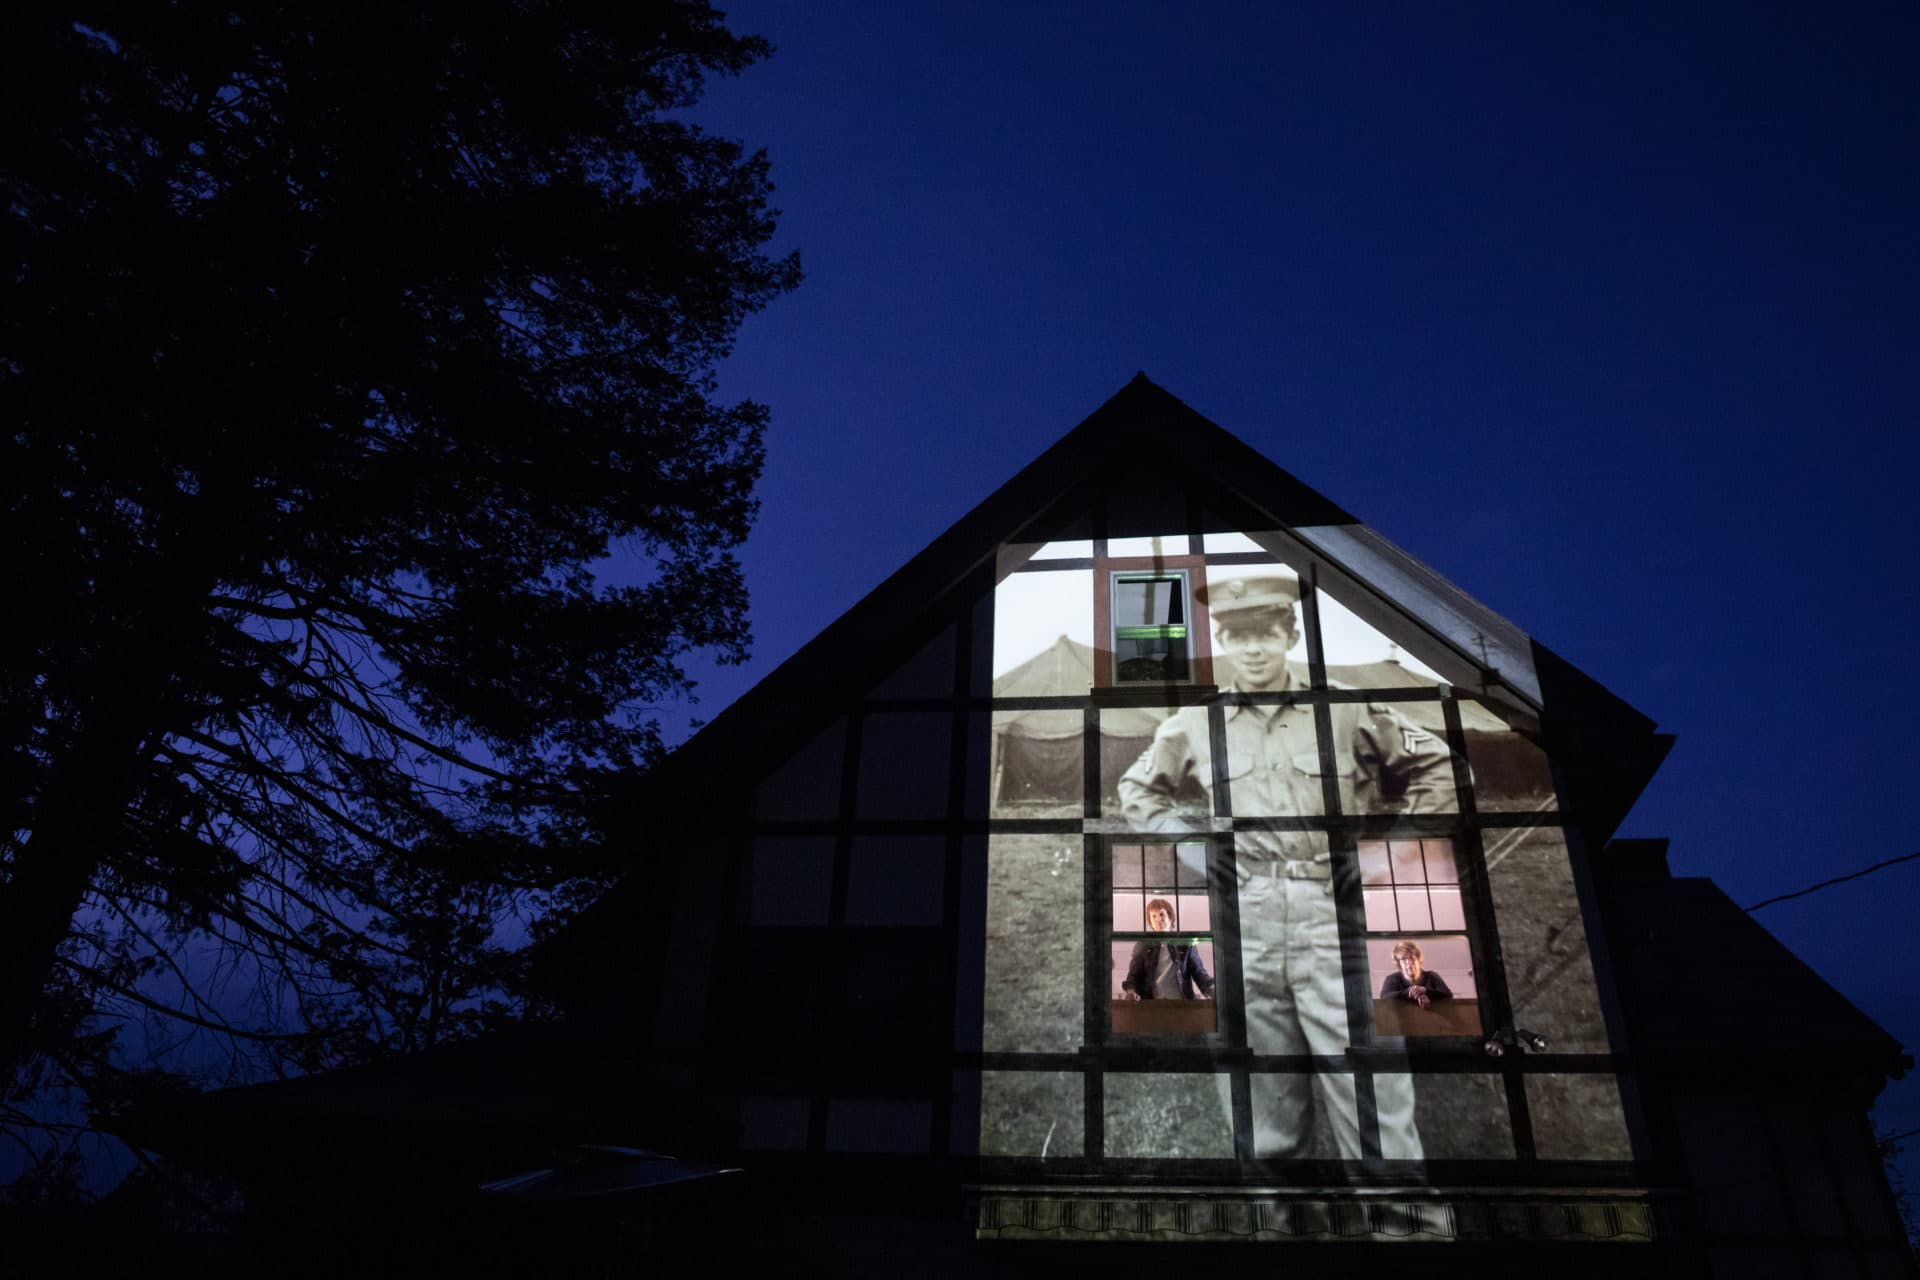 An image of veteran Alfred Healy is projected onto the home of his daughter, Eileen Driscoll, left, as she looks out the window with her sister, Patricia Creran, in Holyoke, Mass., (David Goldman/AP)